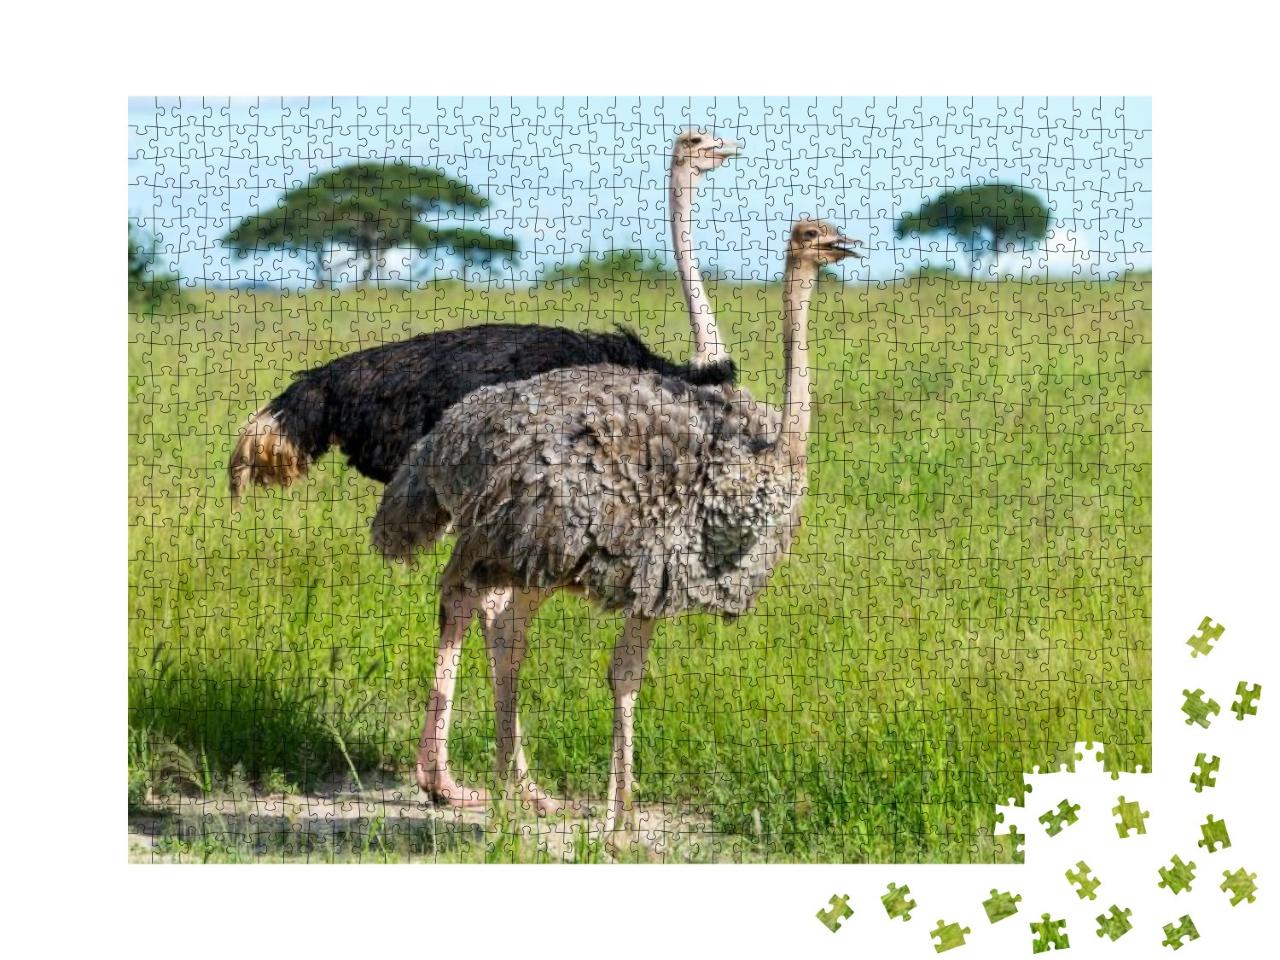 Pair of Ostriches, Tanzania, Africa... Jigsaw Puzzle with 1000 pieces